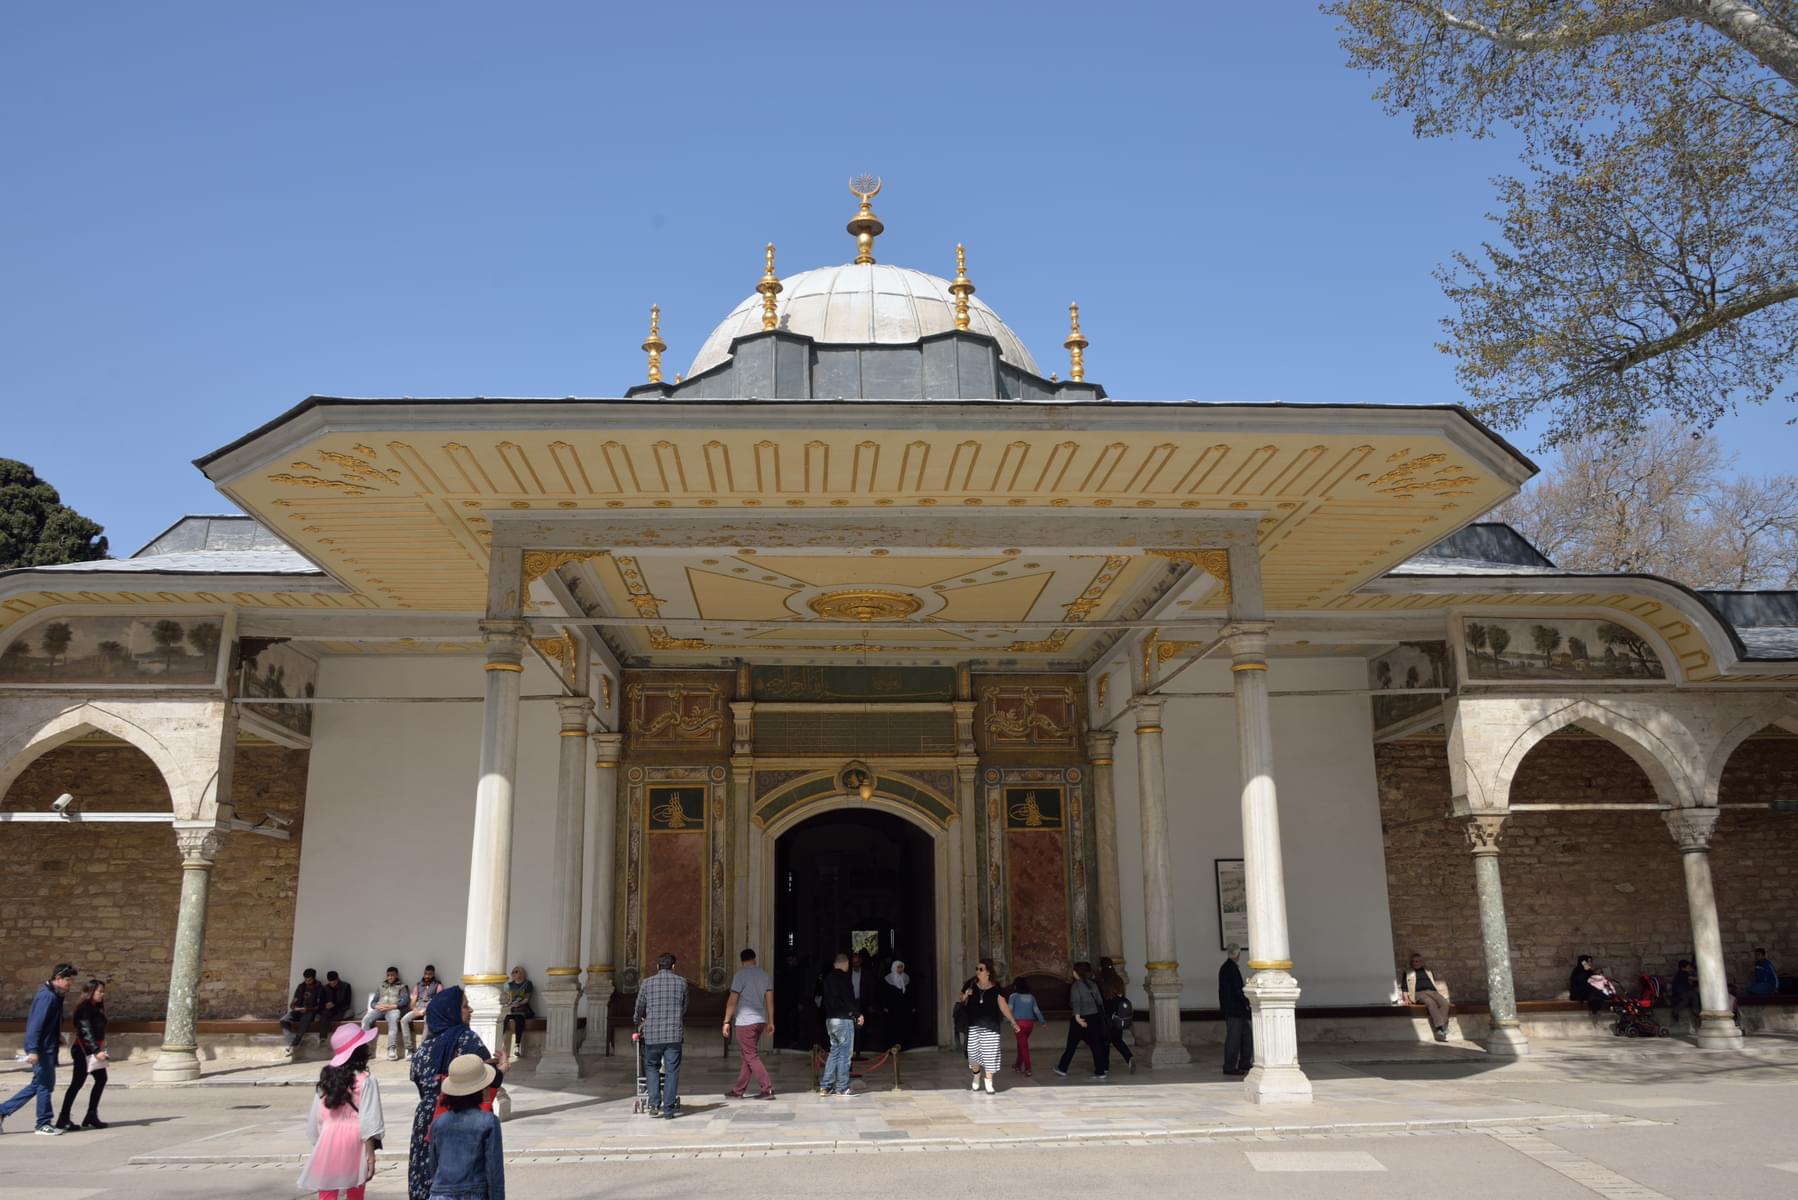 The Gate of Felicity at the Topkapi Palace